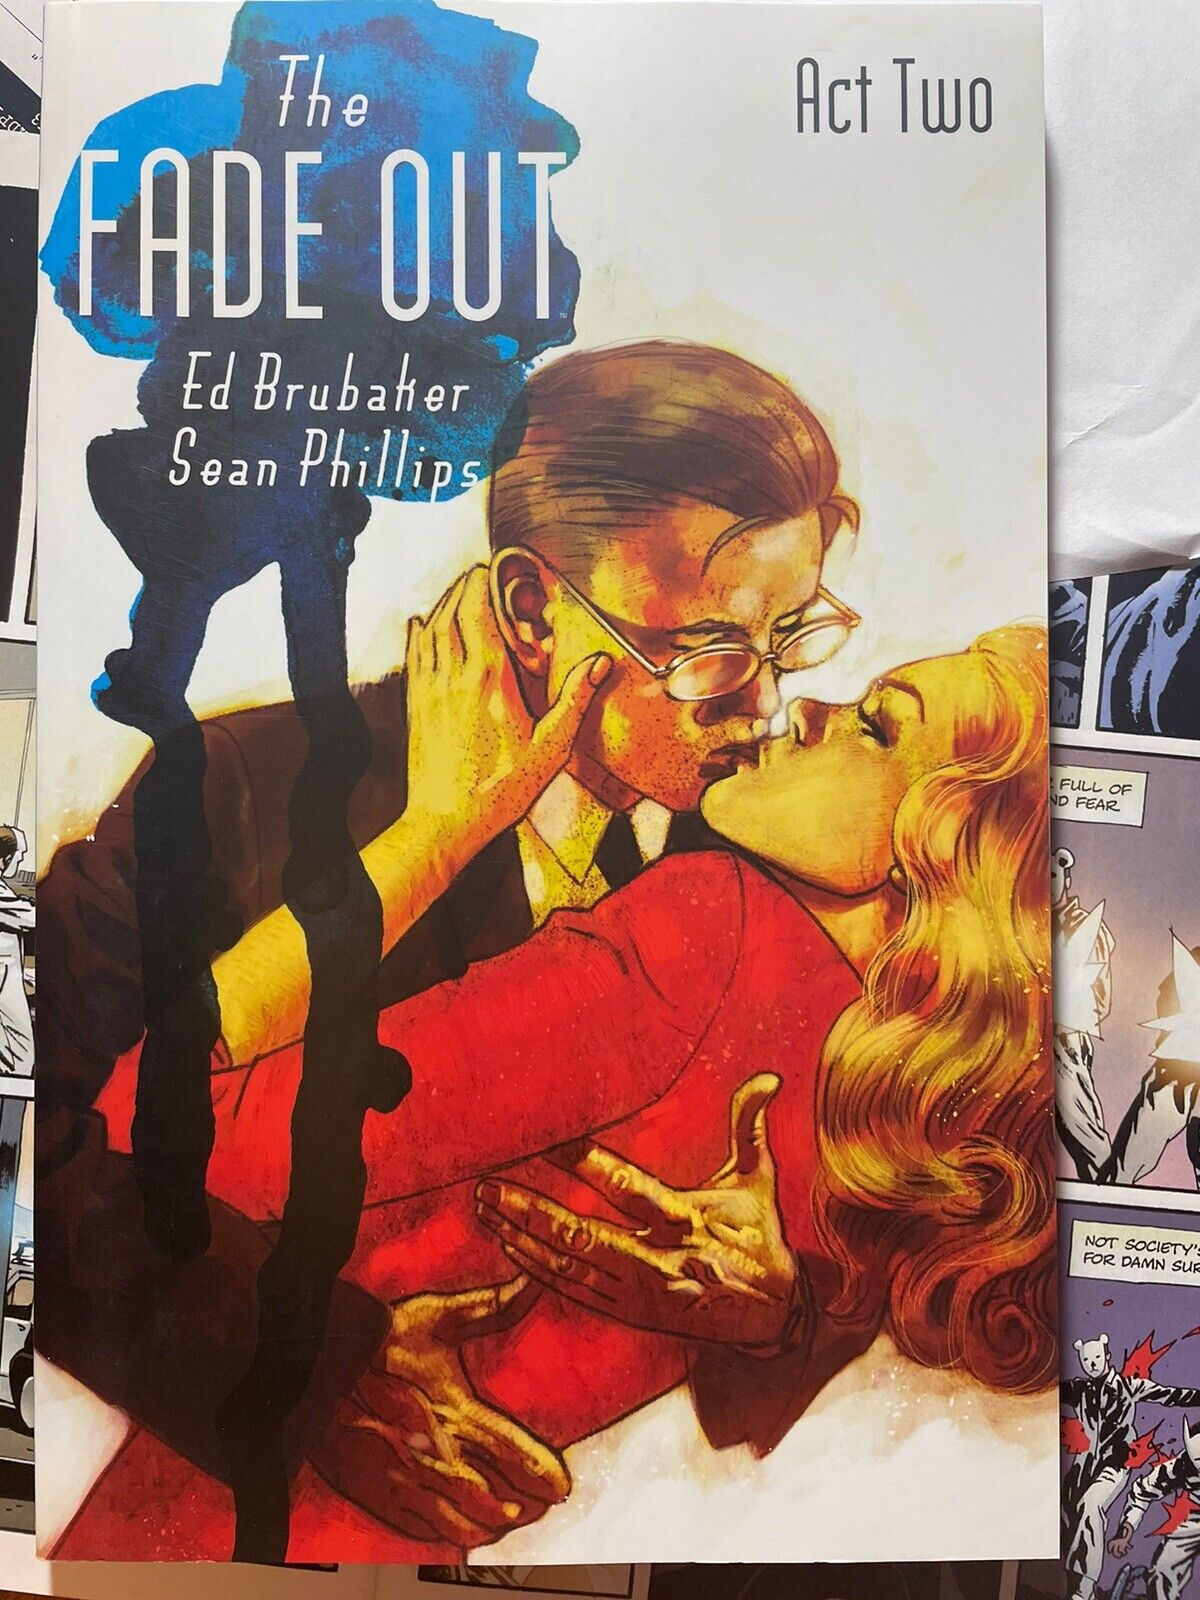 The Fade Out #2 (Image Comics, September 2015)